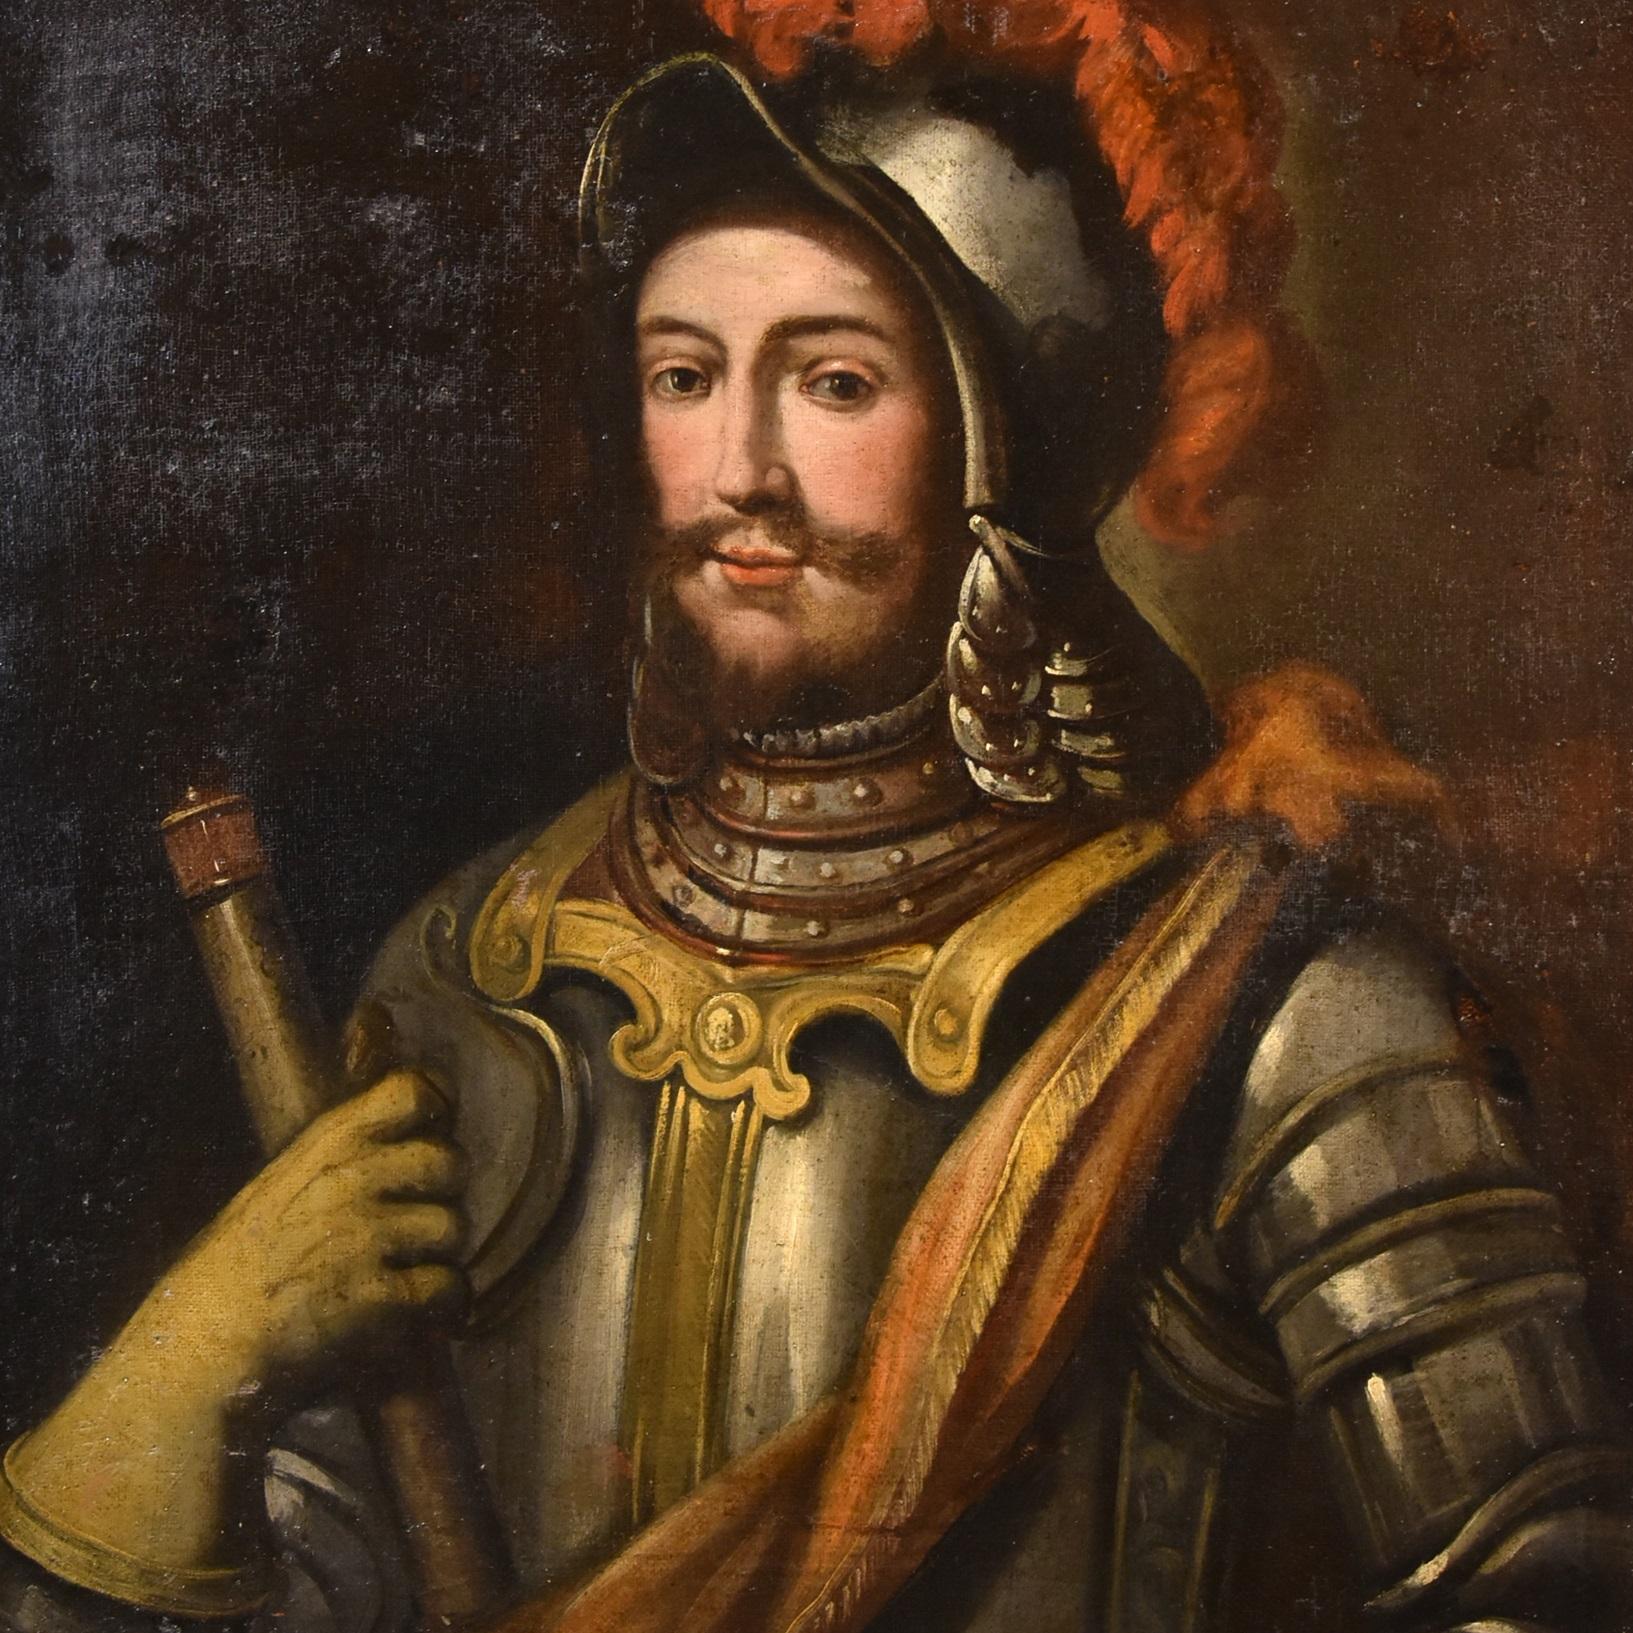 Portrait Knight Paint Oil on canvas 17th Century Lombard school Old master Italy For Sale 5